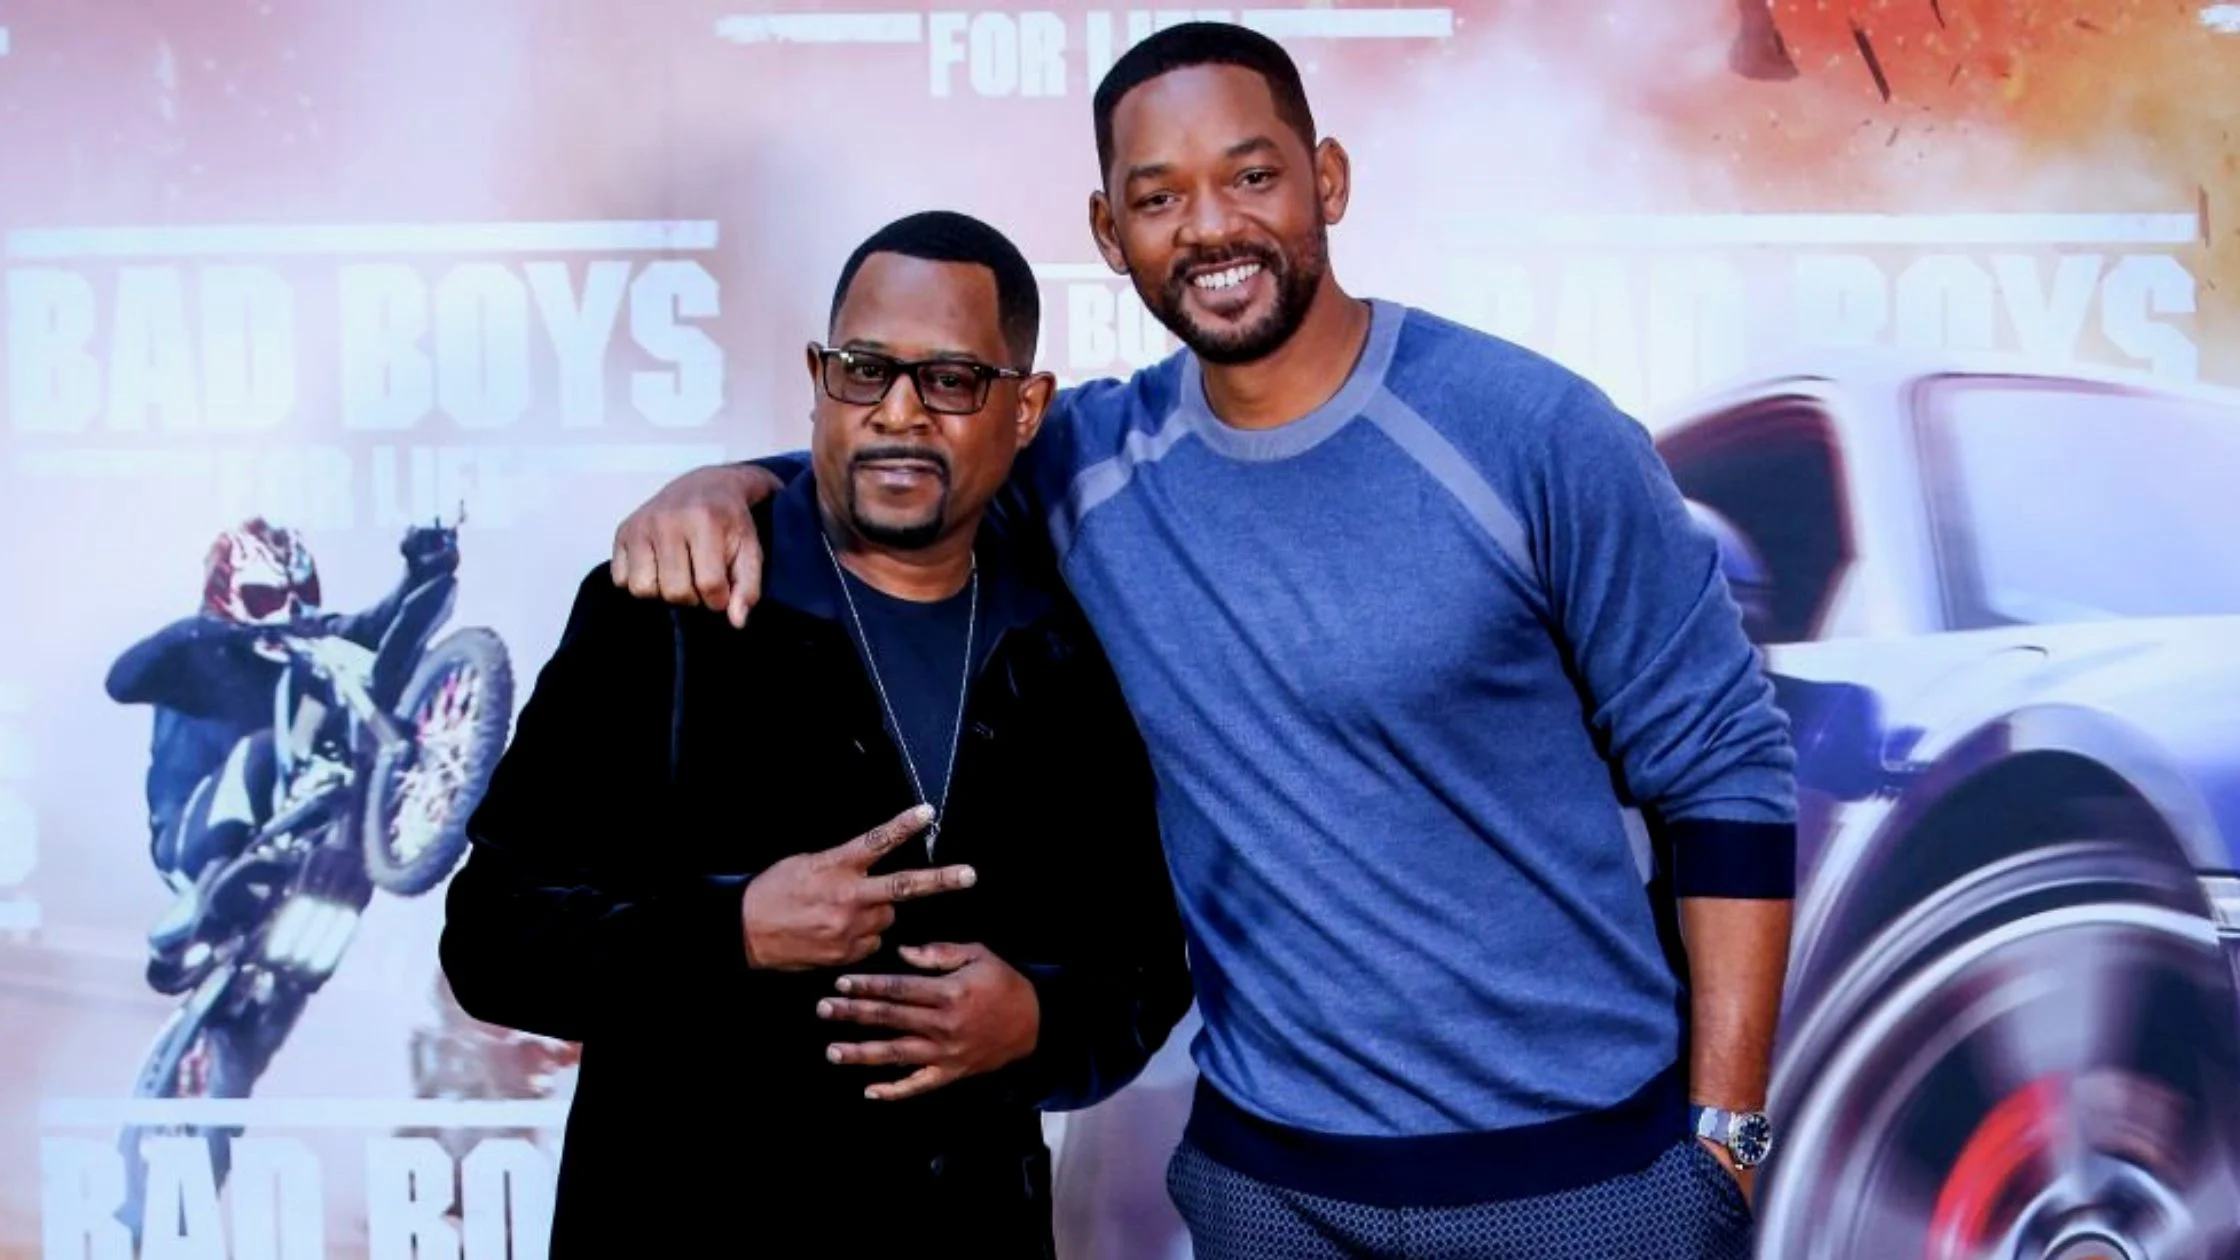 'Bad Boys' Martin Lawrence And Will Smith Are Making A Comeback